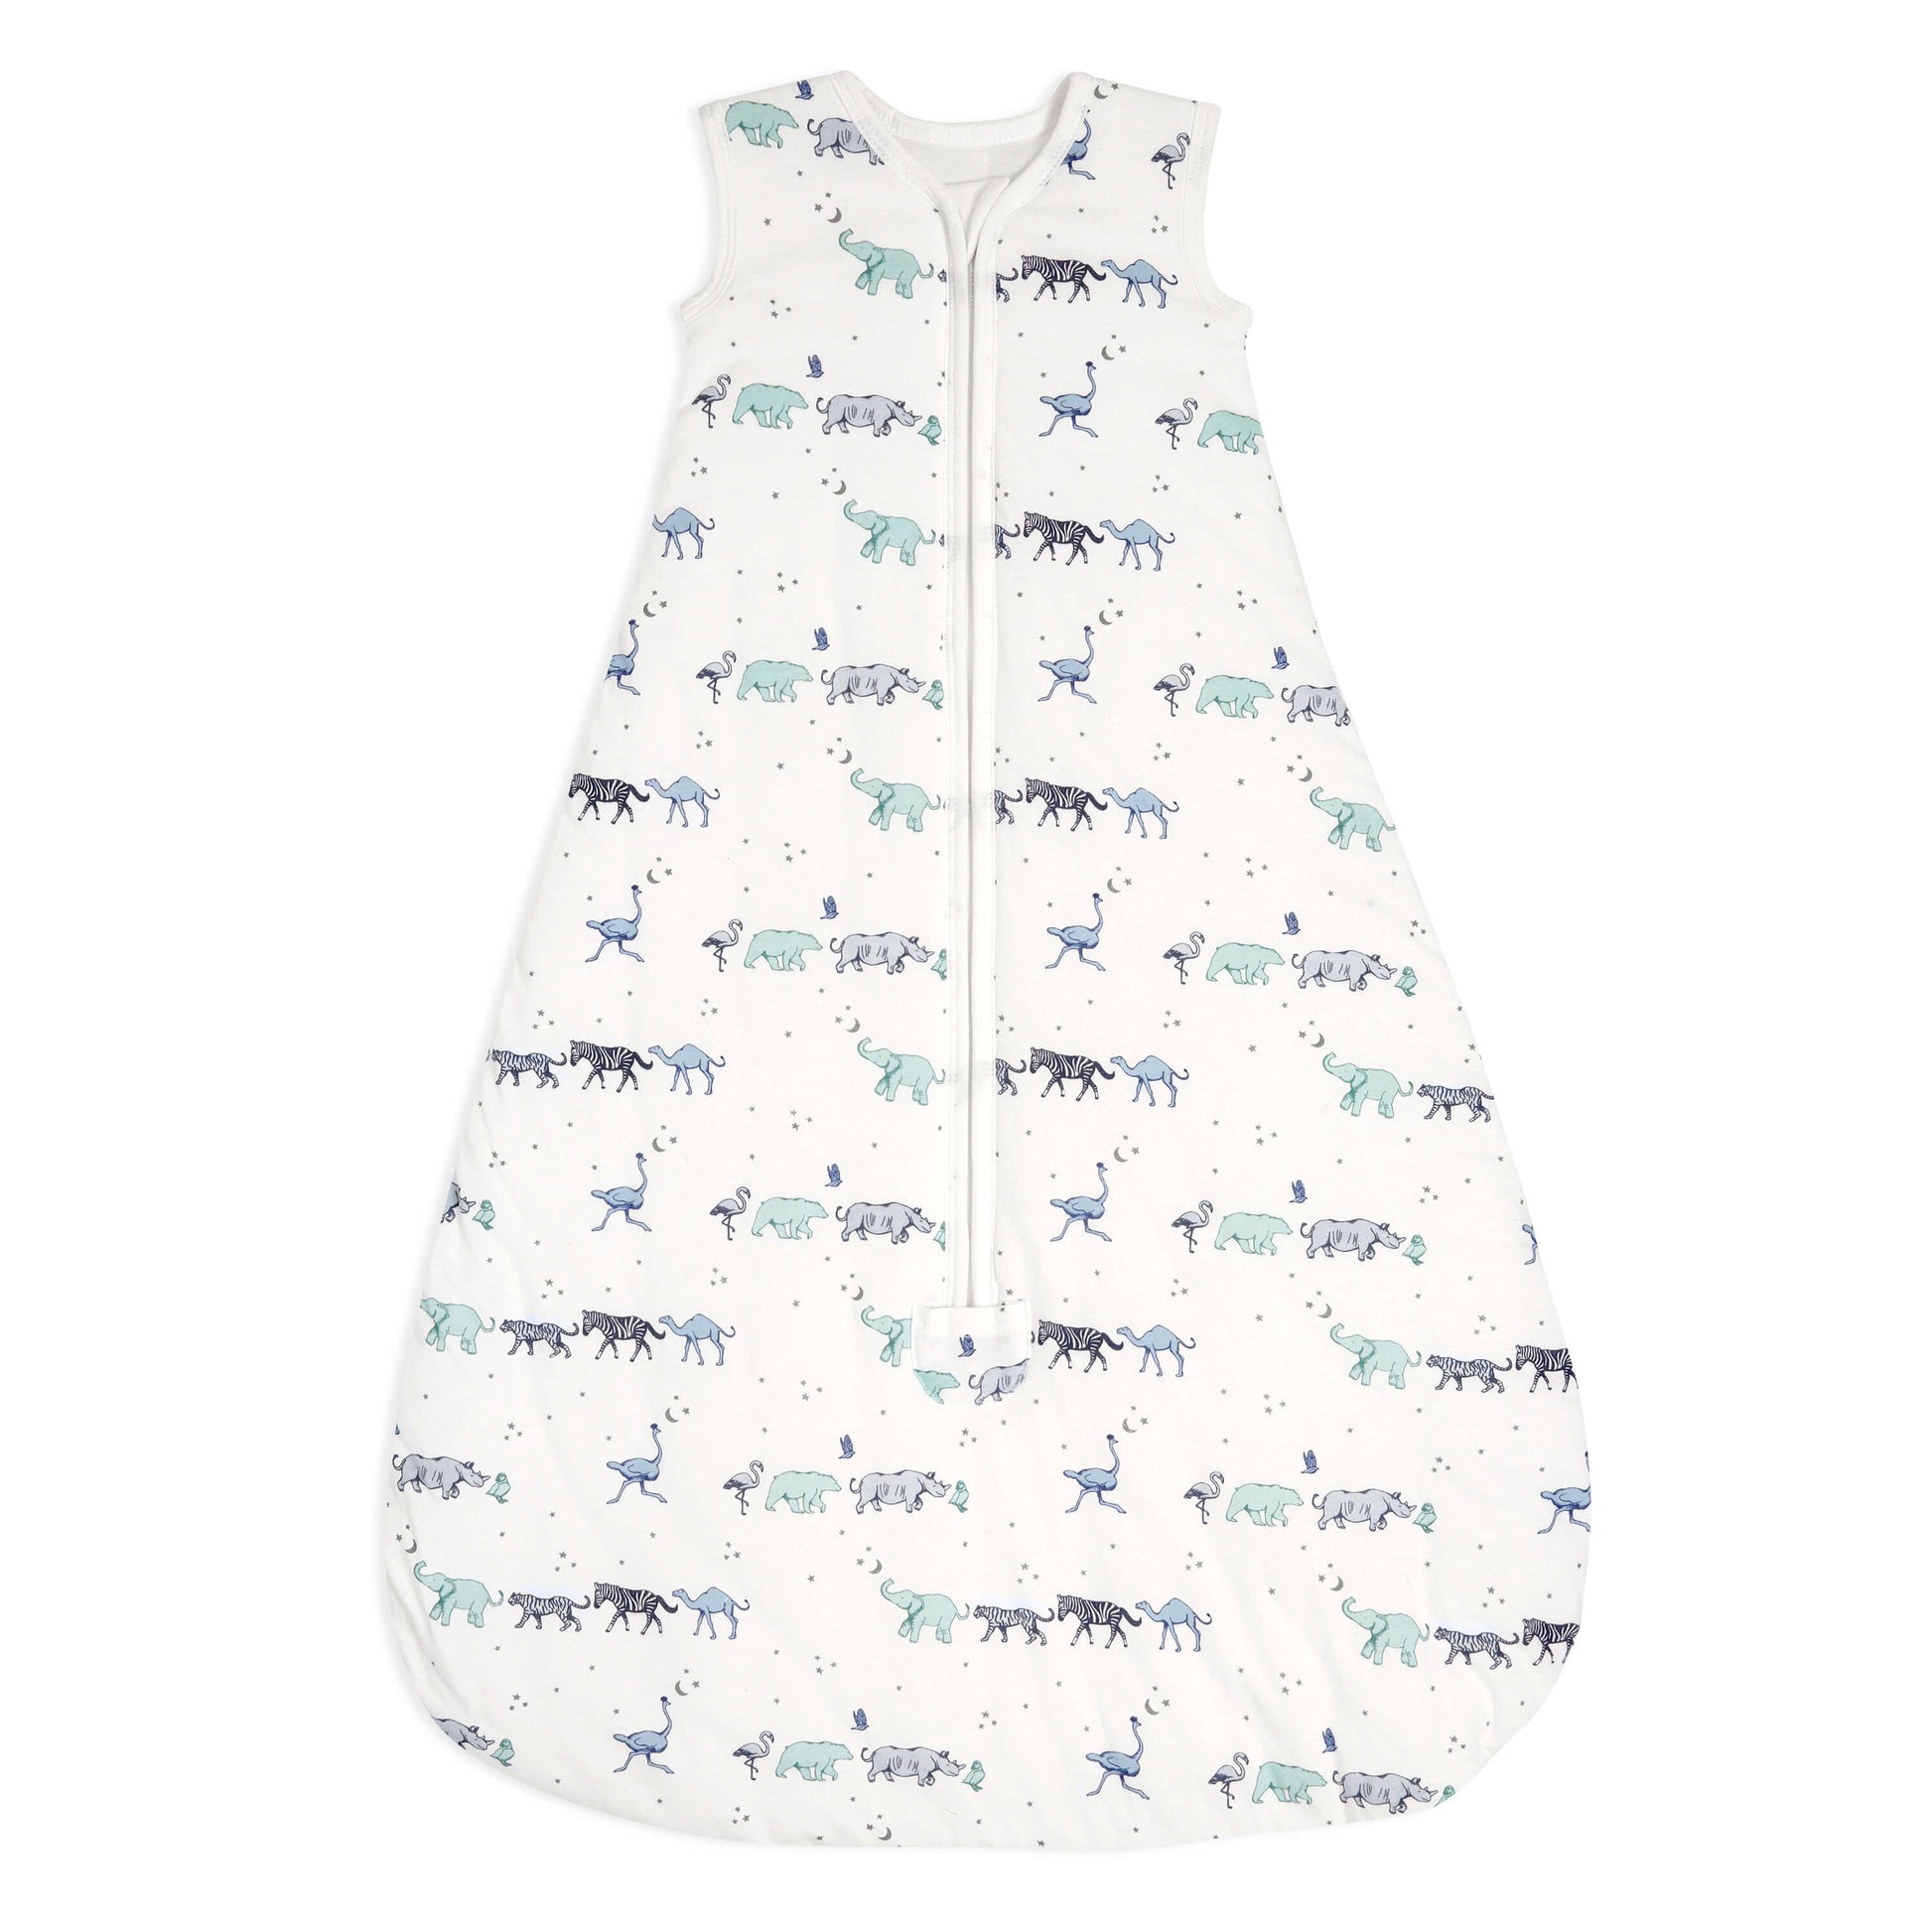 aden + anais Light Sleeping Bag with a 1.0 tog rating is a perfect choice for warmer nights or room temperatures of 24-27°C (75-81°F). Made with breathable muslin, it helps regulate your baby's body temperature, keeping them comfortable and cosy without overheating. 